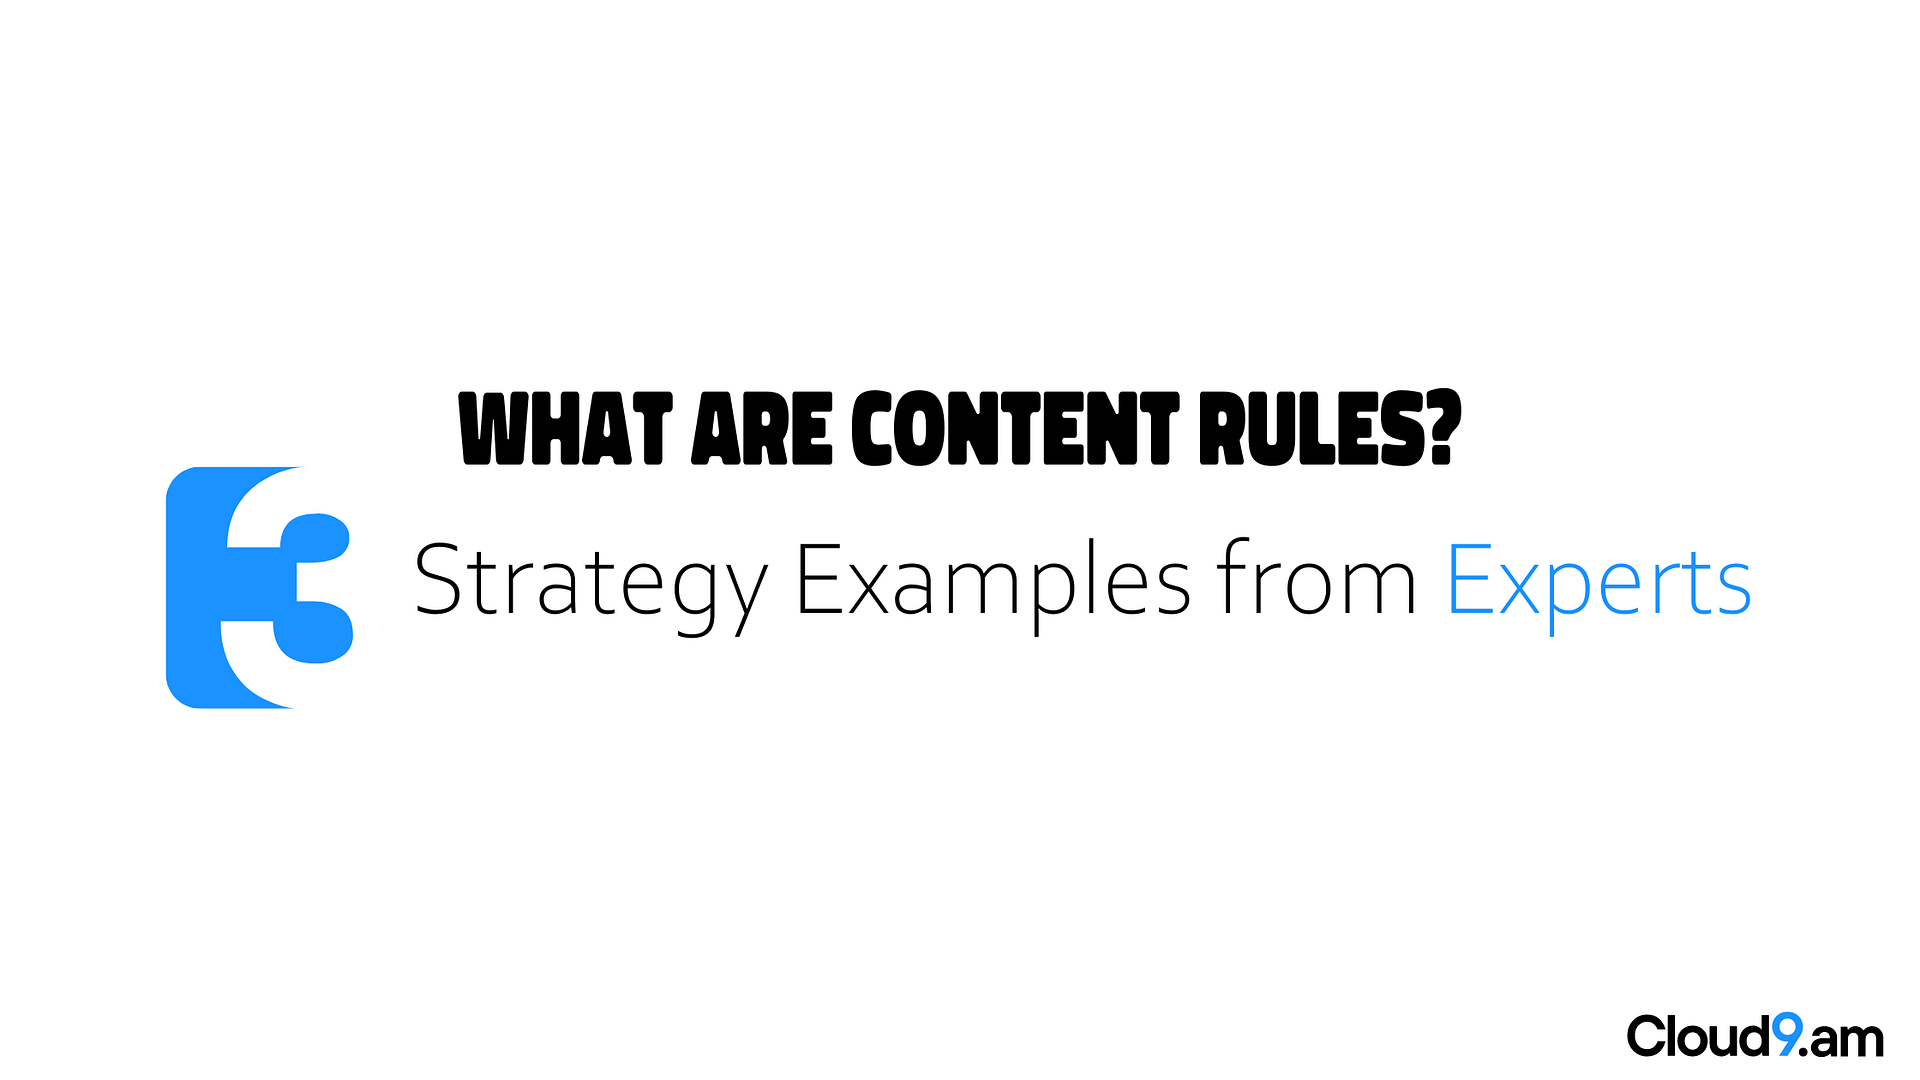 What are content rules? 3 Strategy Examples from Experts